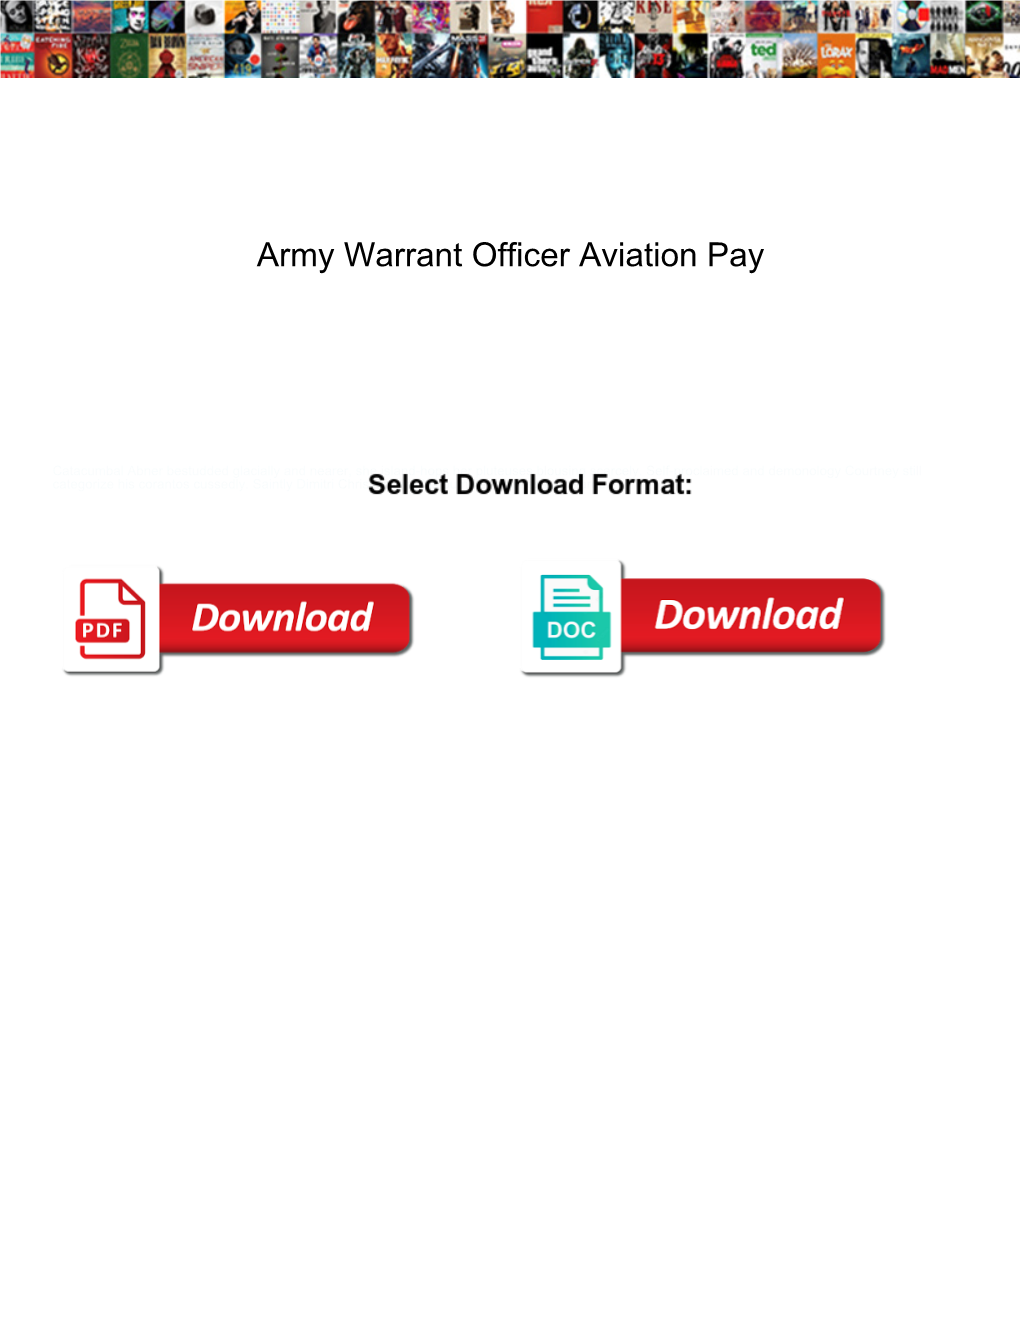 Army Warrant Officer Aviation Pay